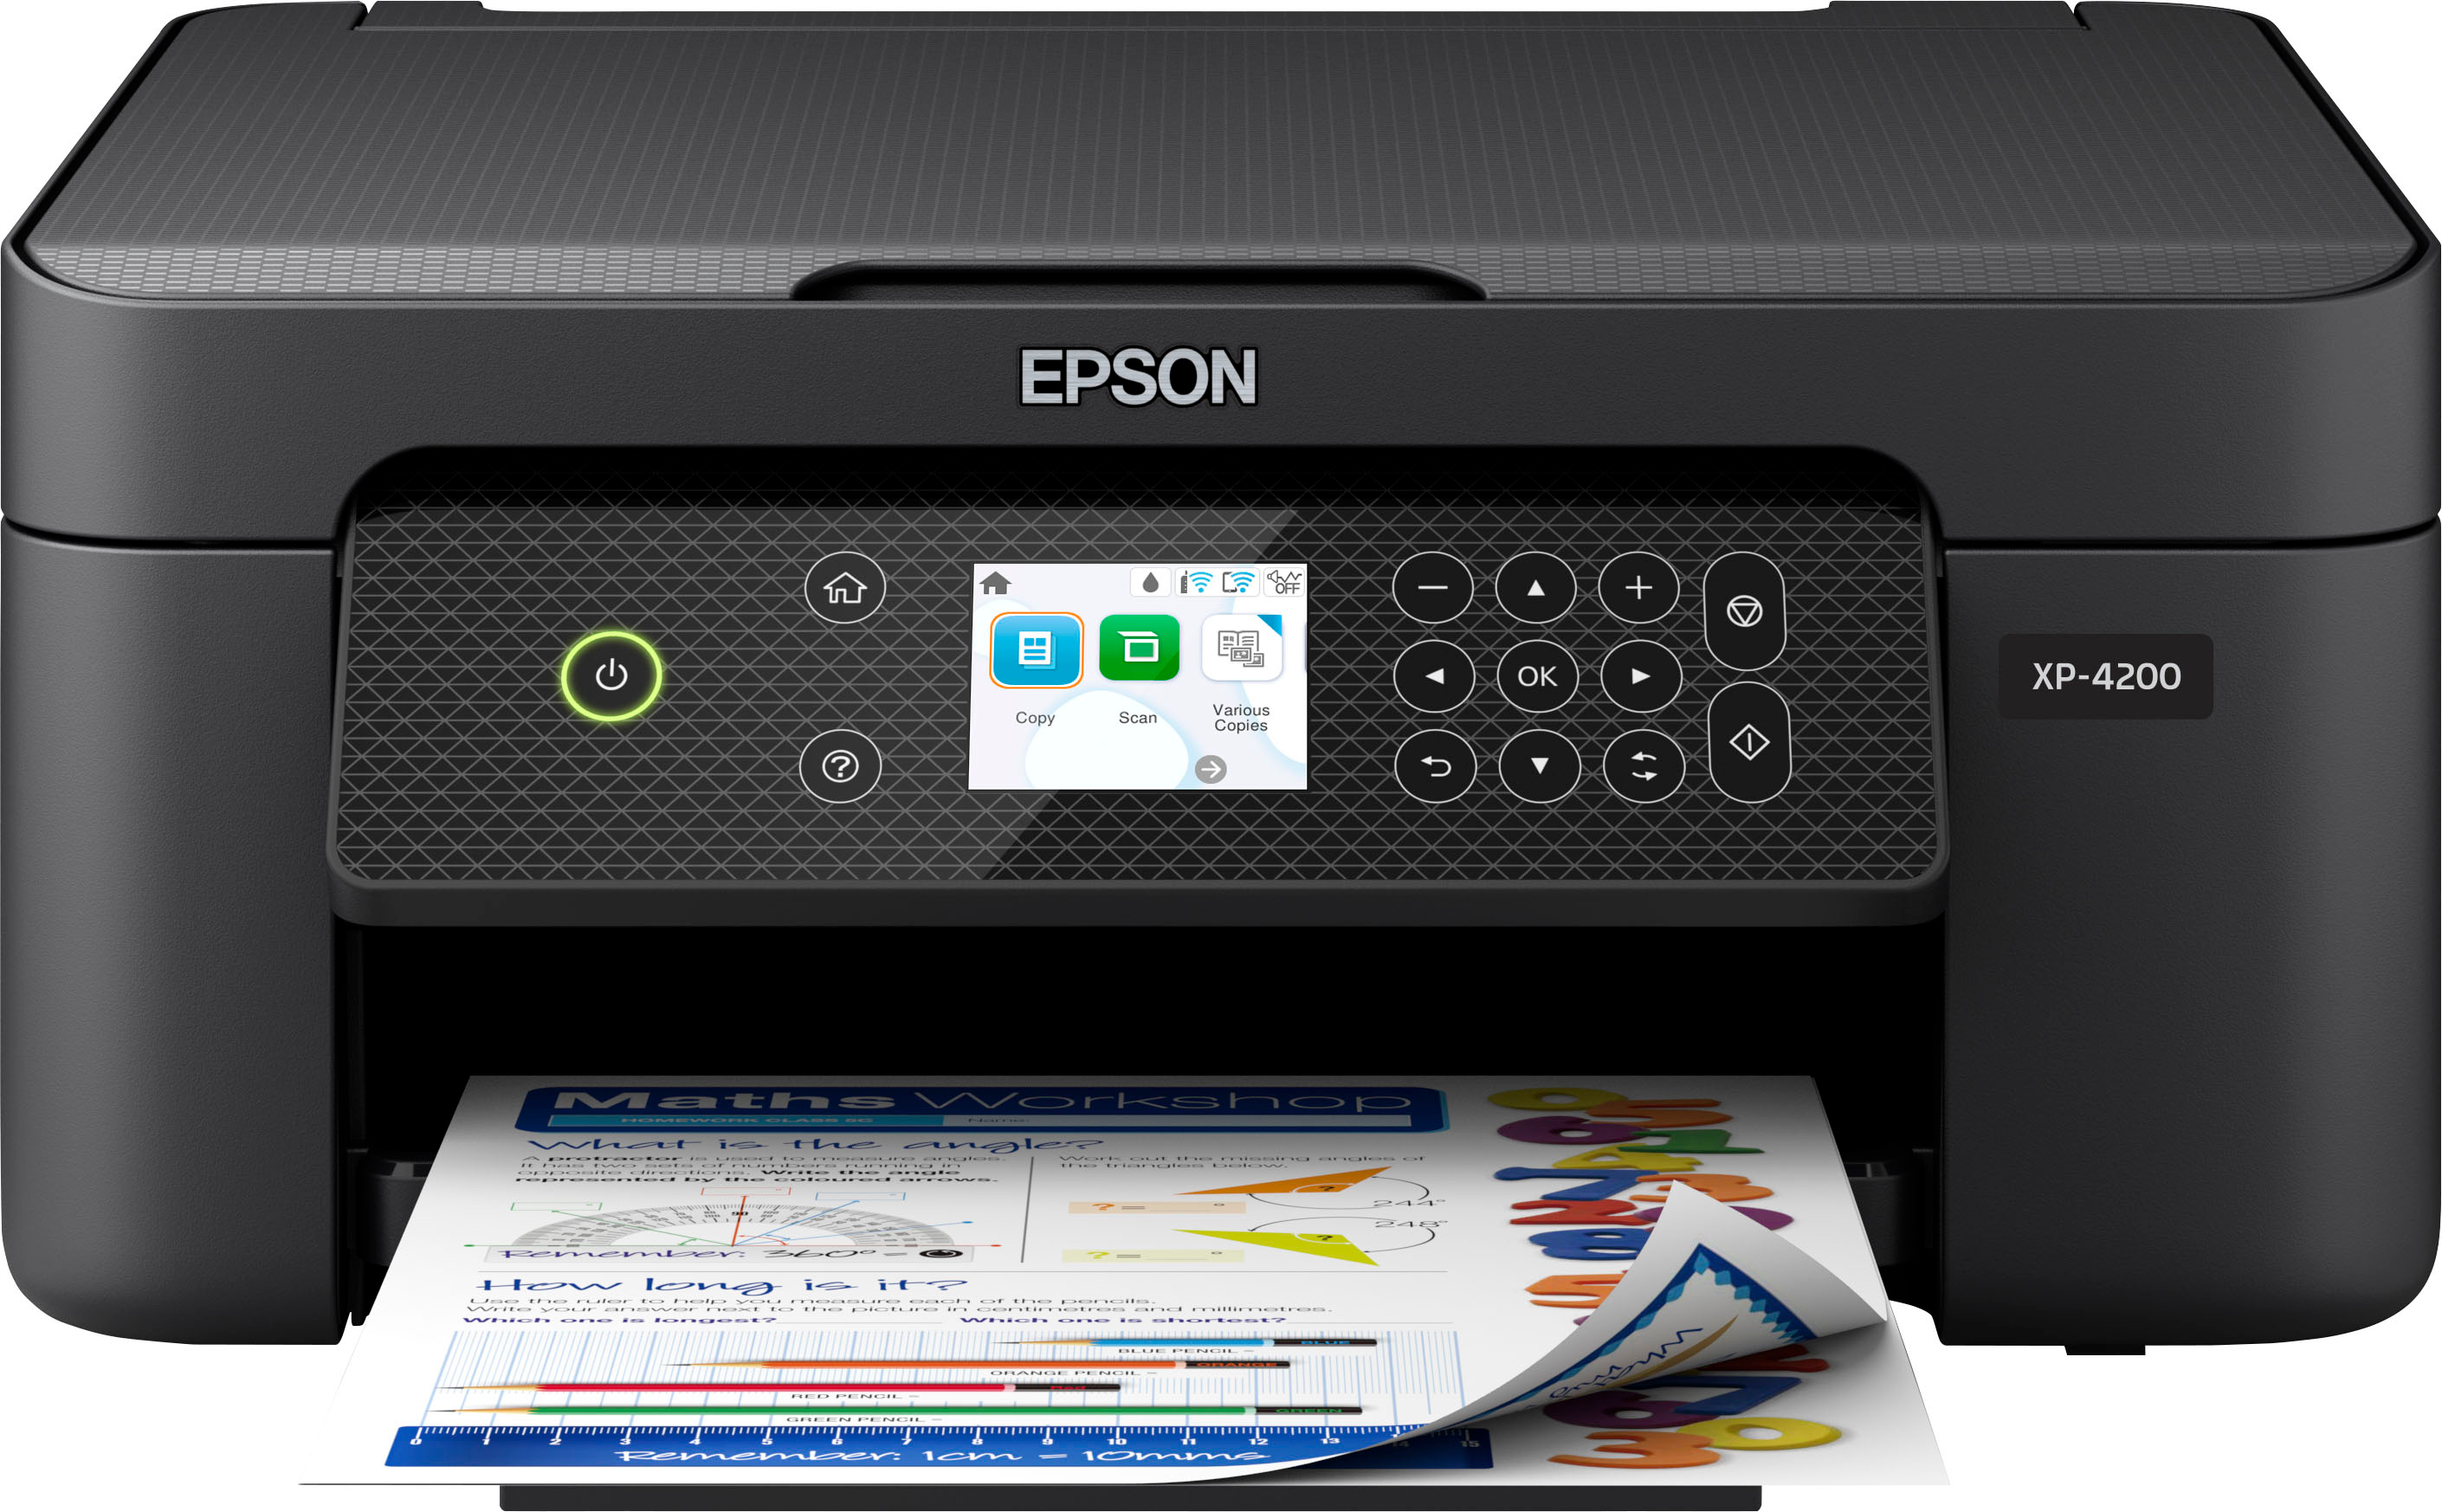 Epson vs Canon vs HP printers: Who makes the best all-in-one